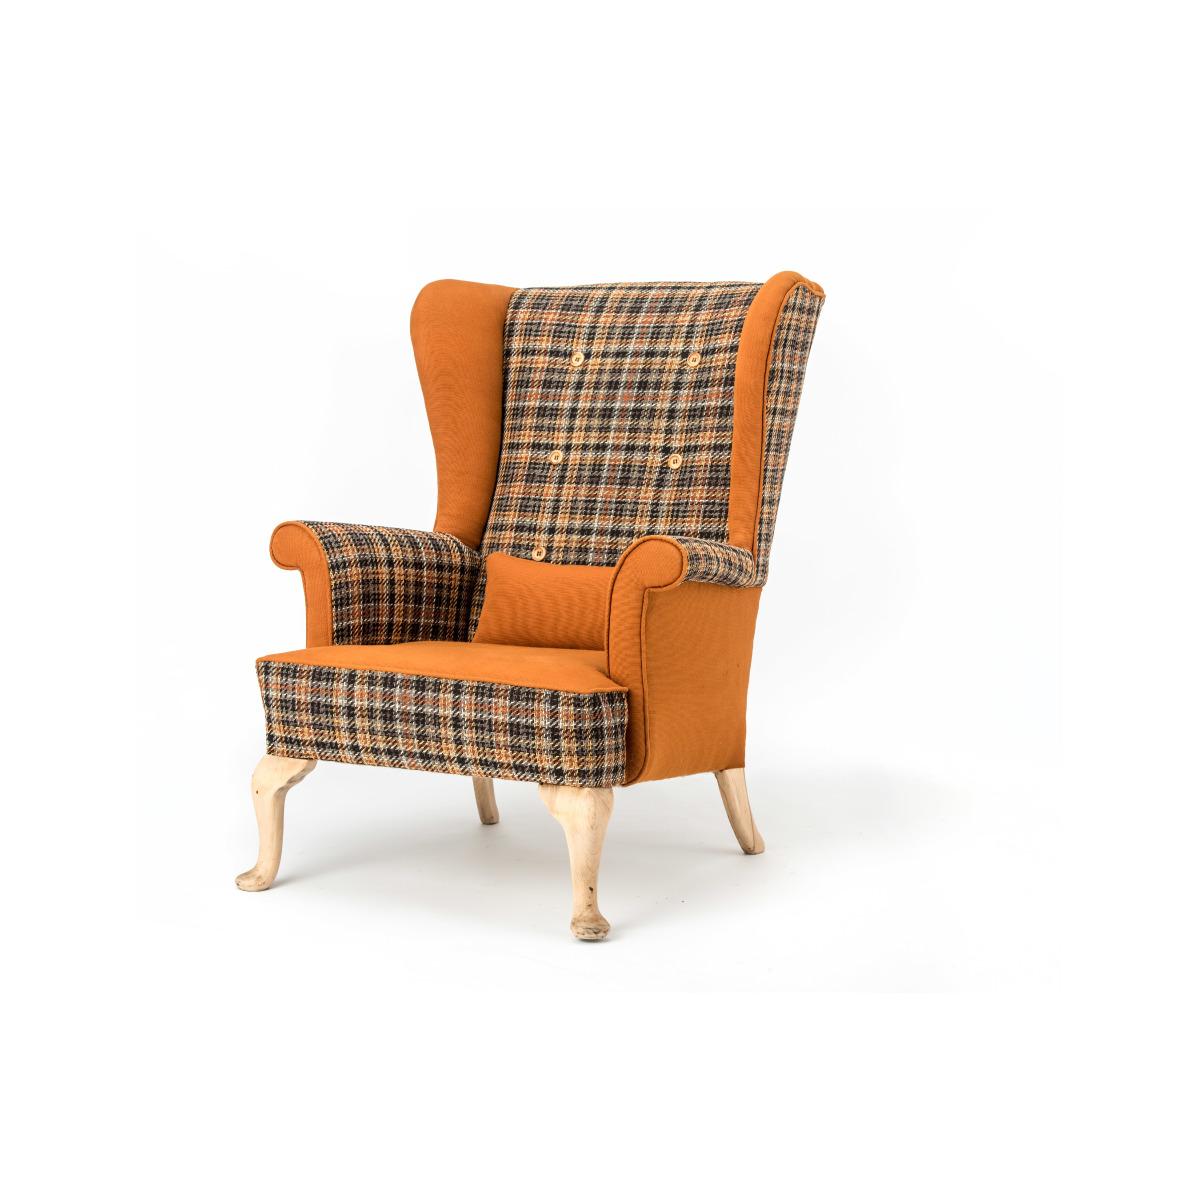 Original Parker Knoll unique fireside wing chair reupholstered in a funky ‘Autumn Nut’ tweed with contrasting Toffee panels with 6 burnt wooden deep buttoned back detail and resting on original sanded legs. Complete with contrasting scatter cushion